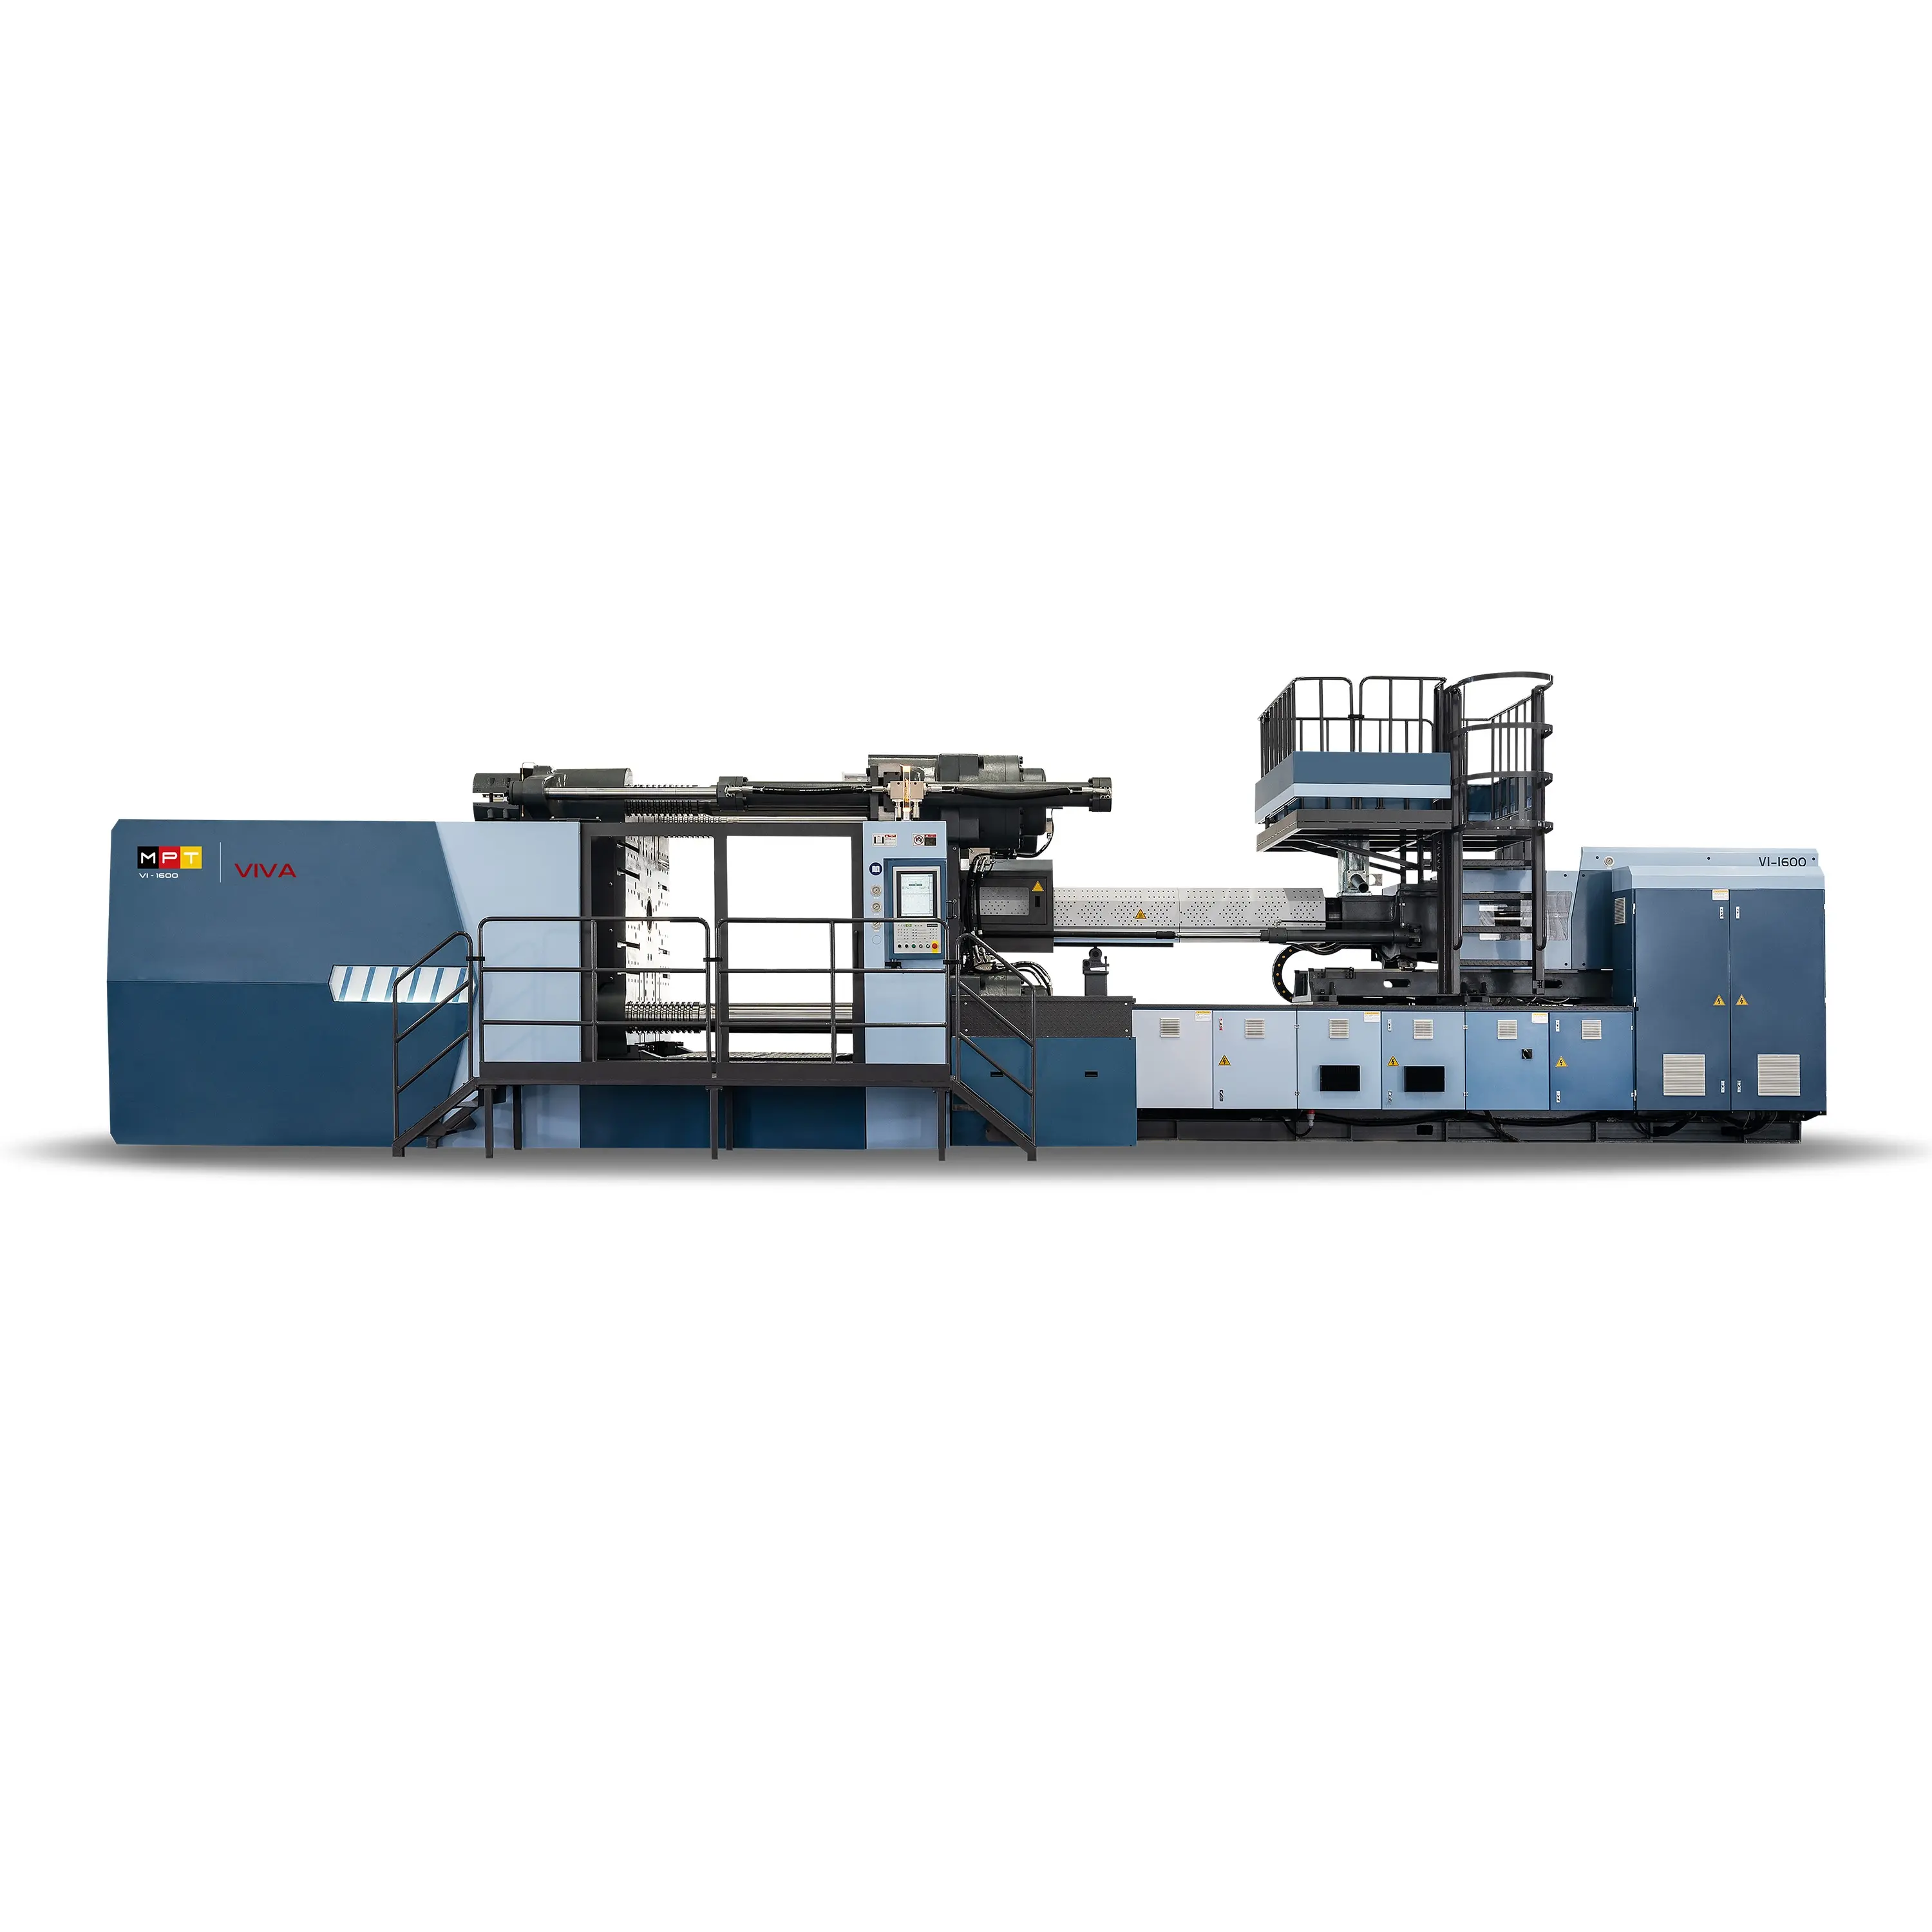 VI650 /650 Ton Two Platen large opening stroke Plastic Injection Molding Machine with servo system price